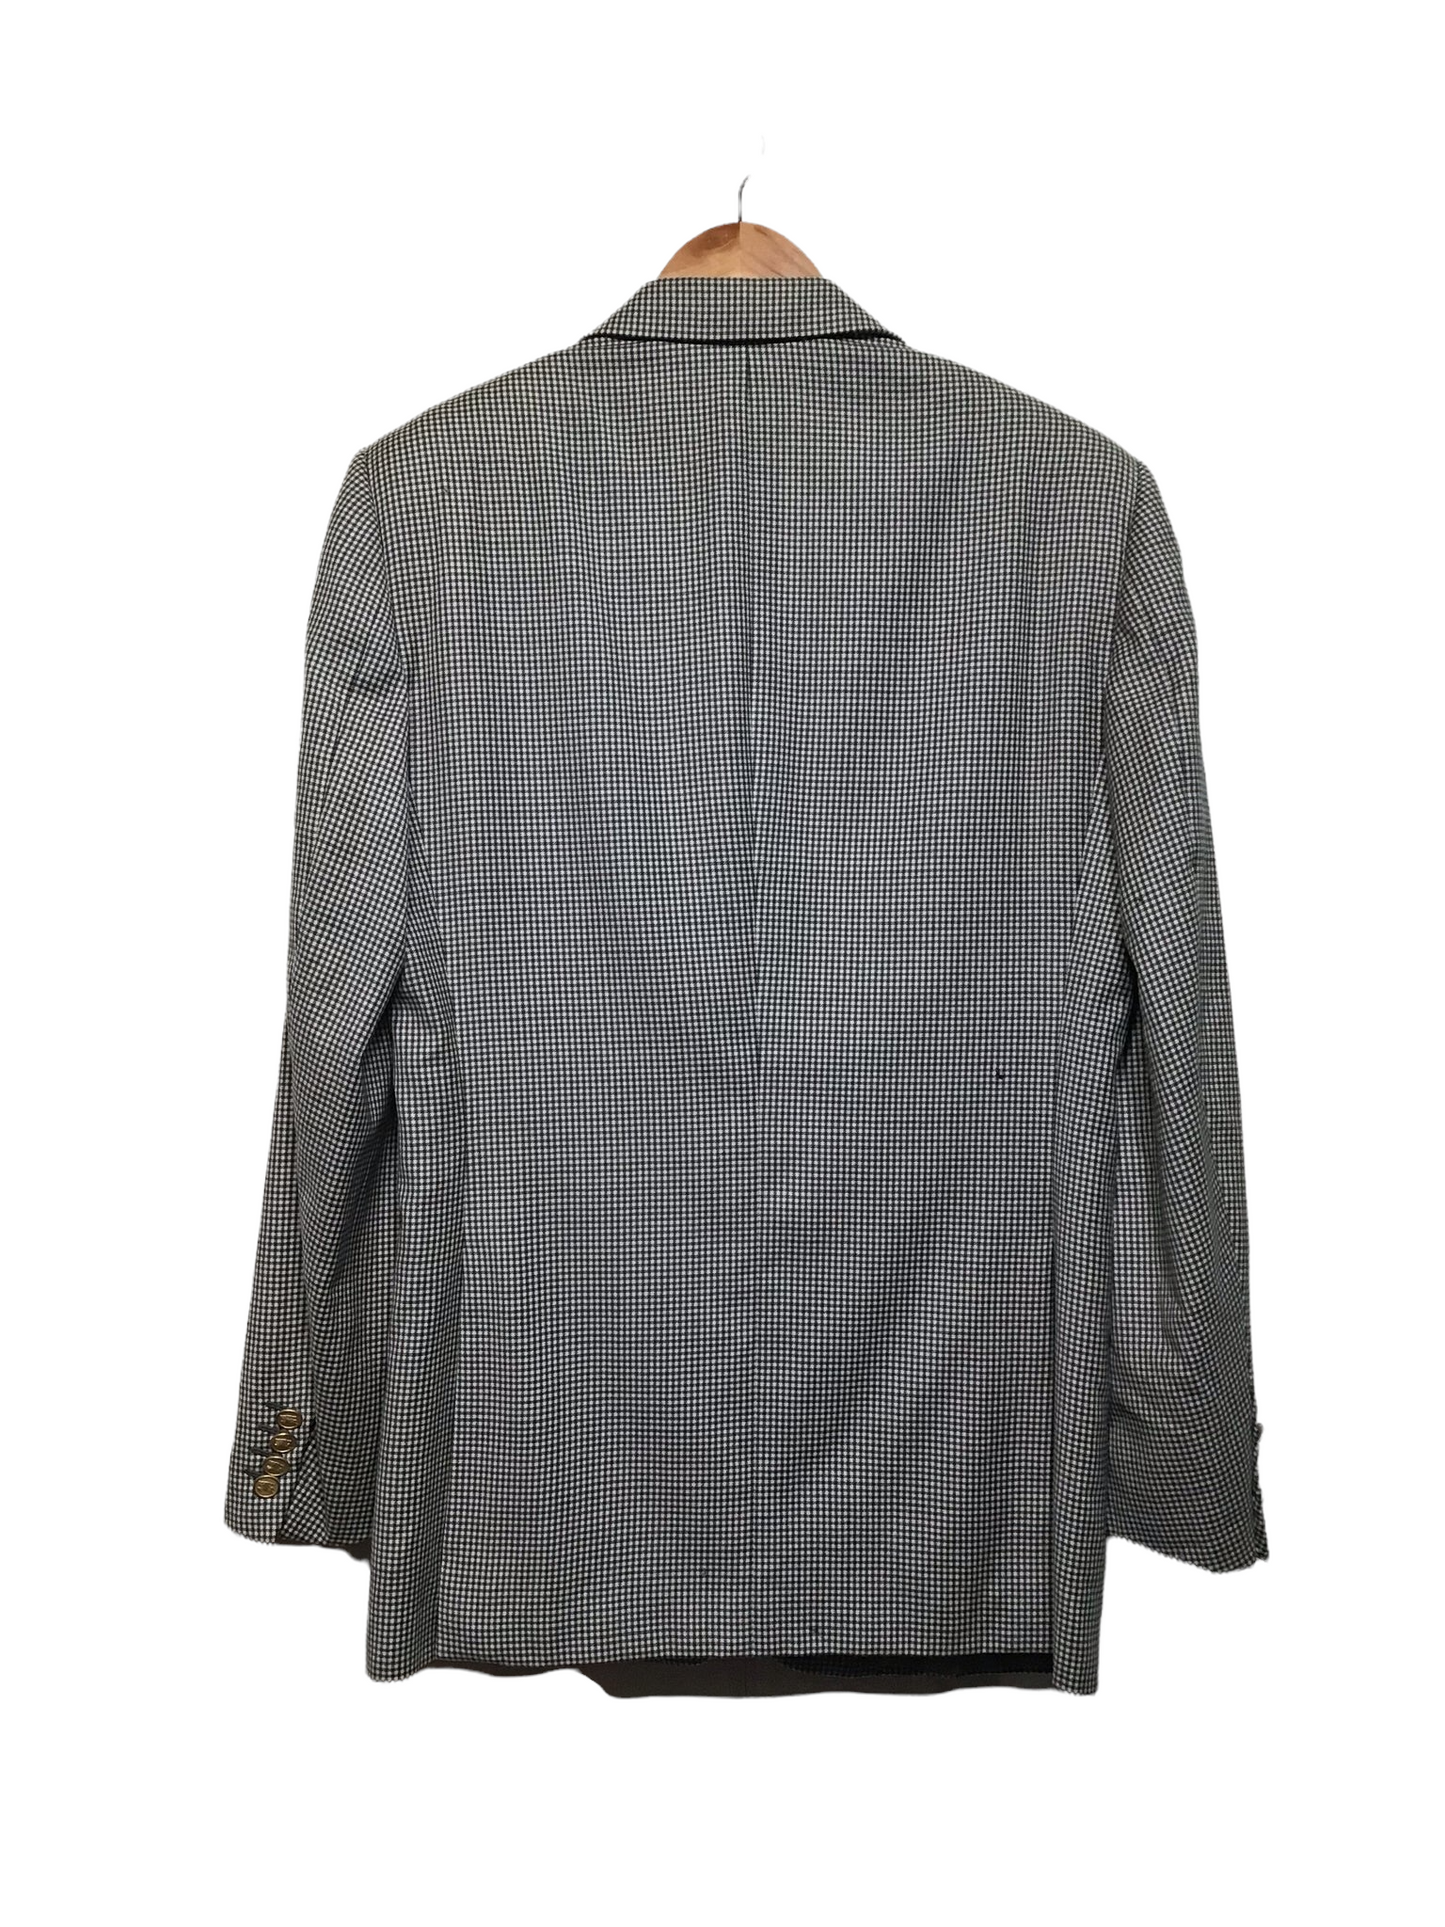 Burberry Chequer Blazer (Size fitted 38”)